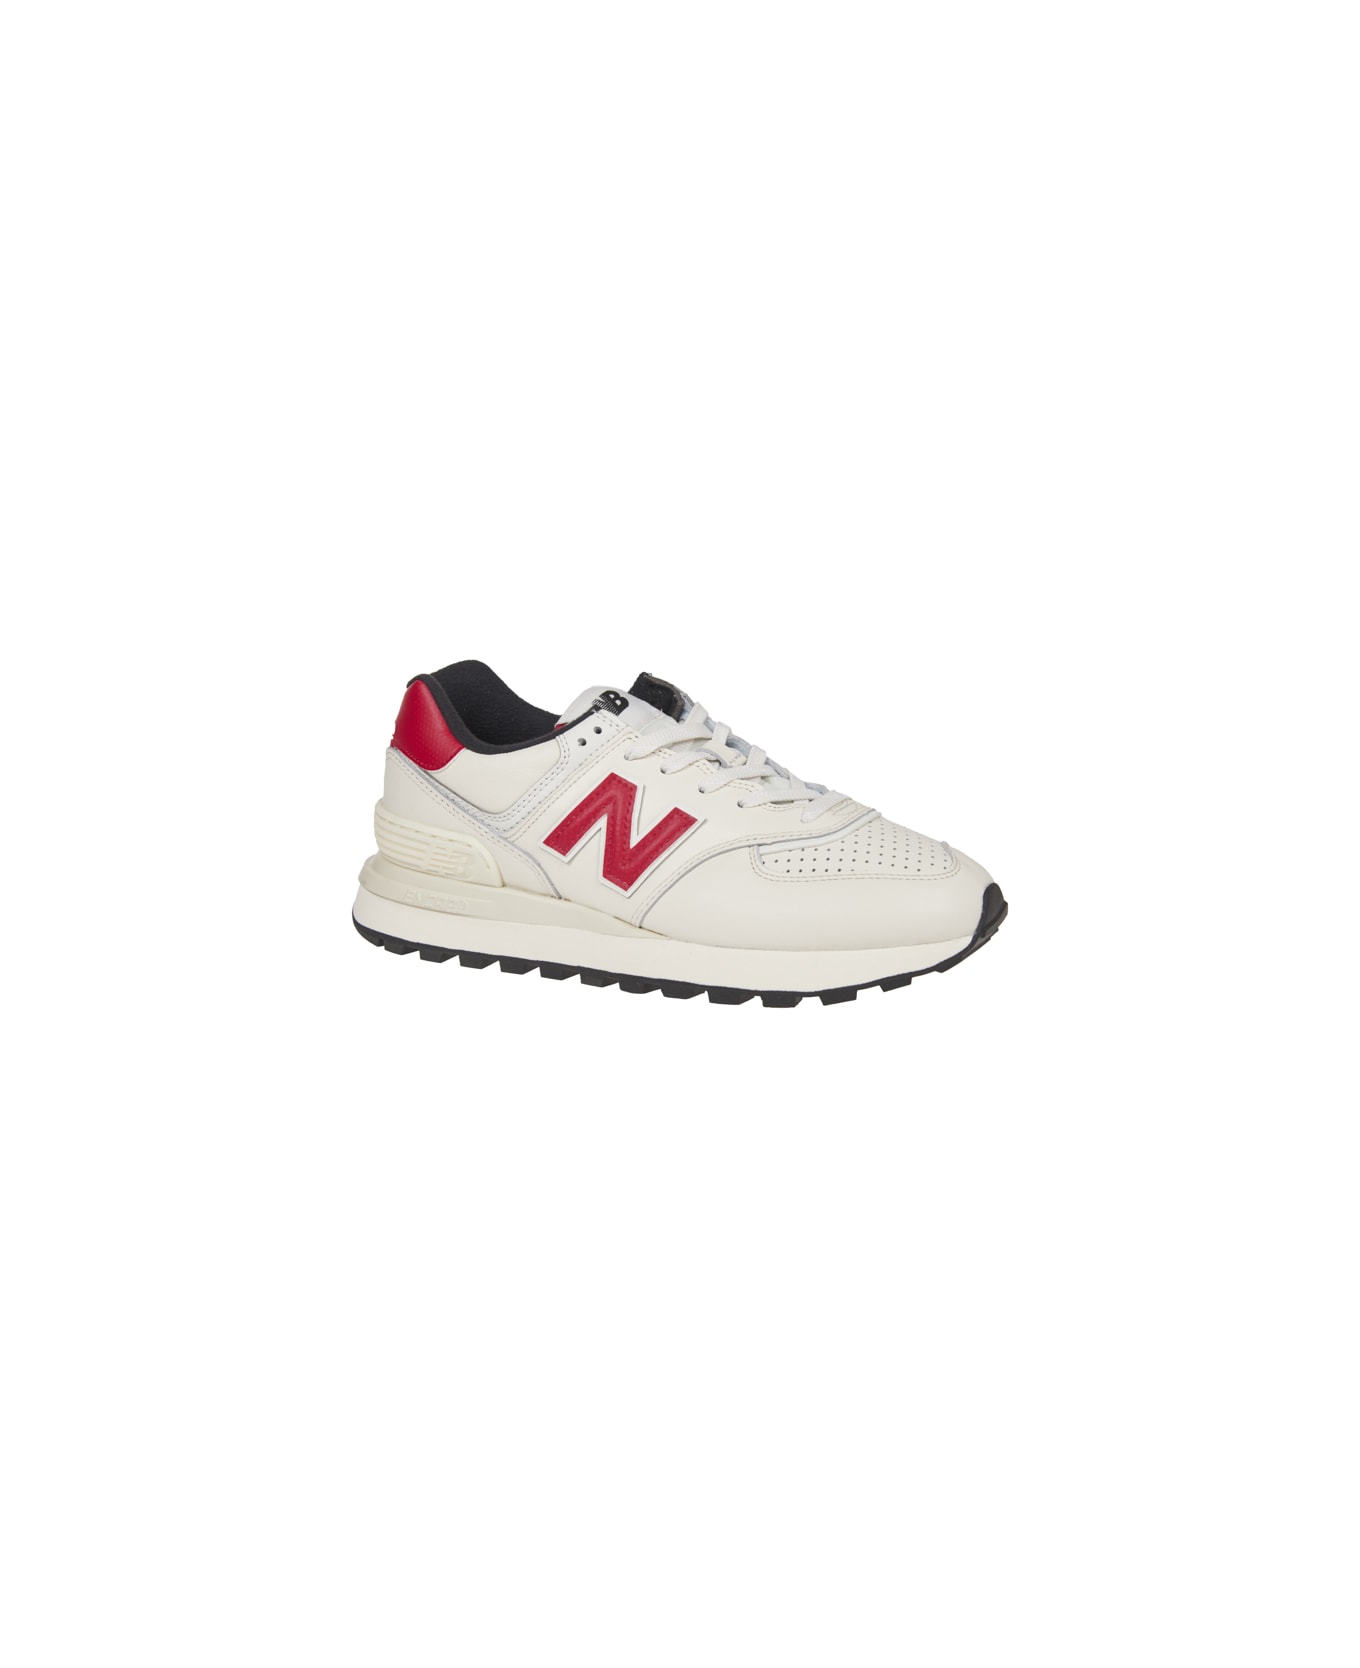 New Balance 574 Sneakers - White Red